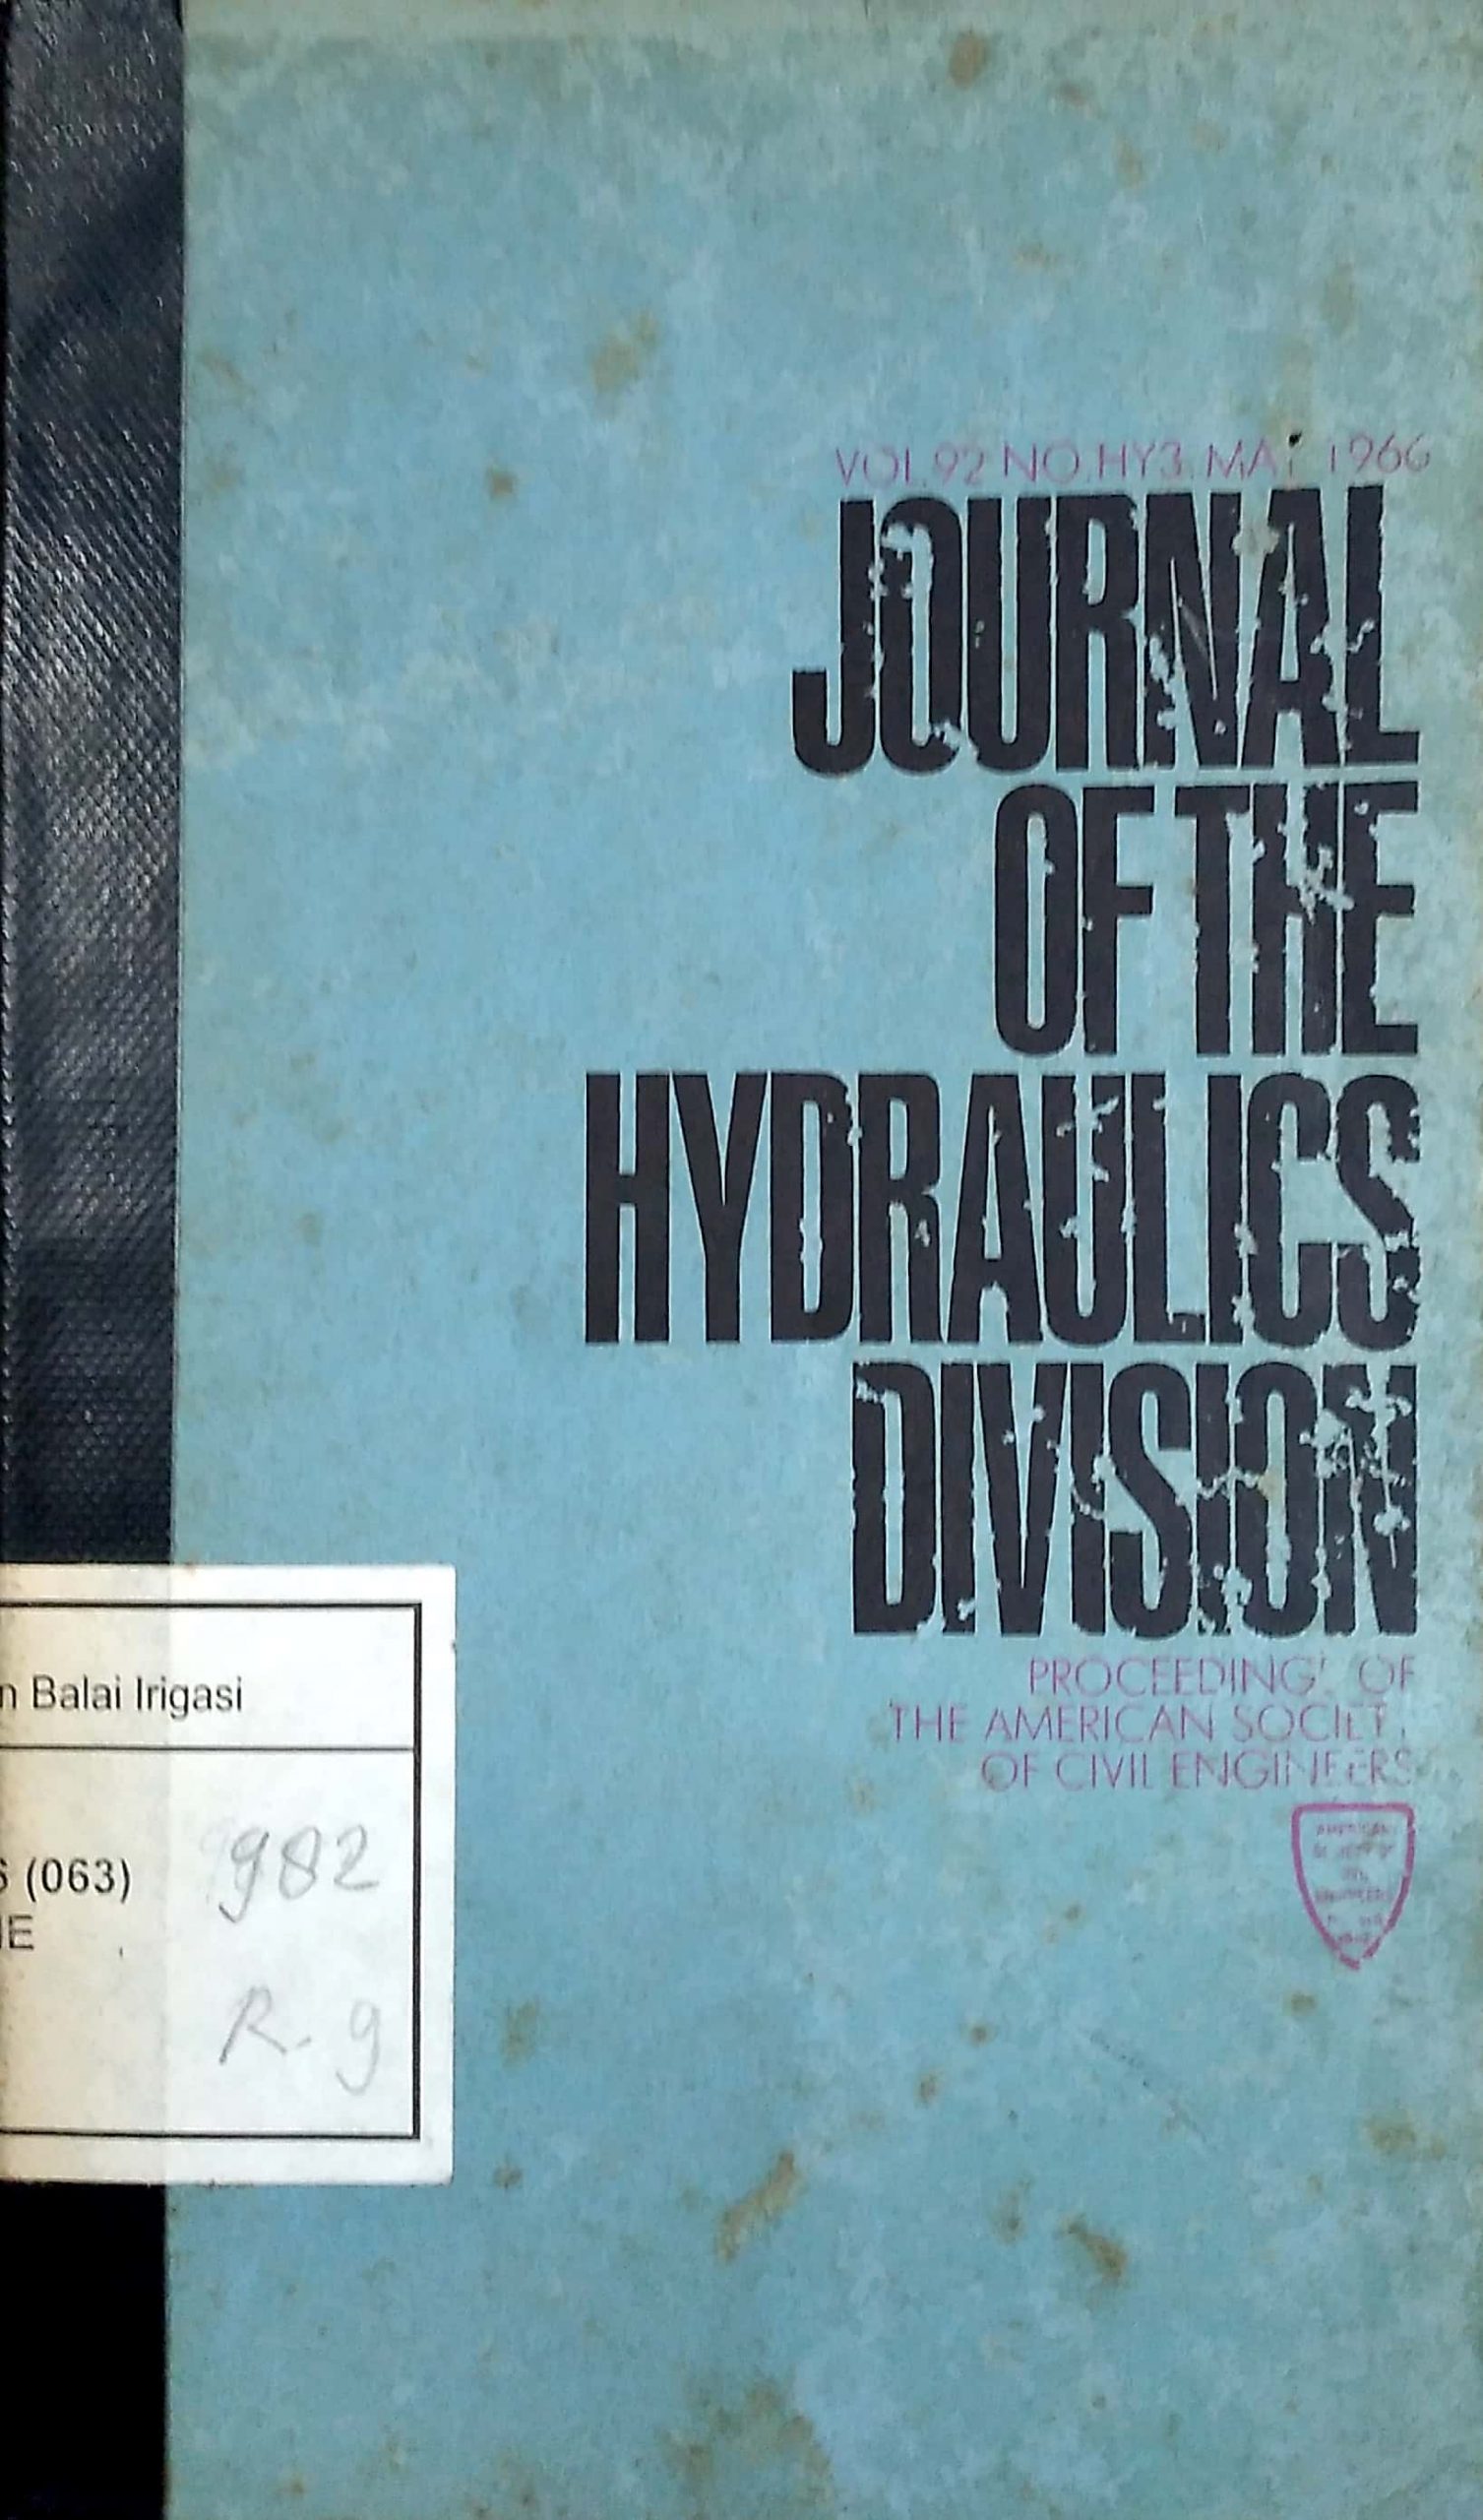 JOURNAL OF THE HYDRAULICS DIVISION